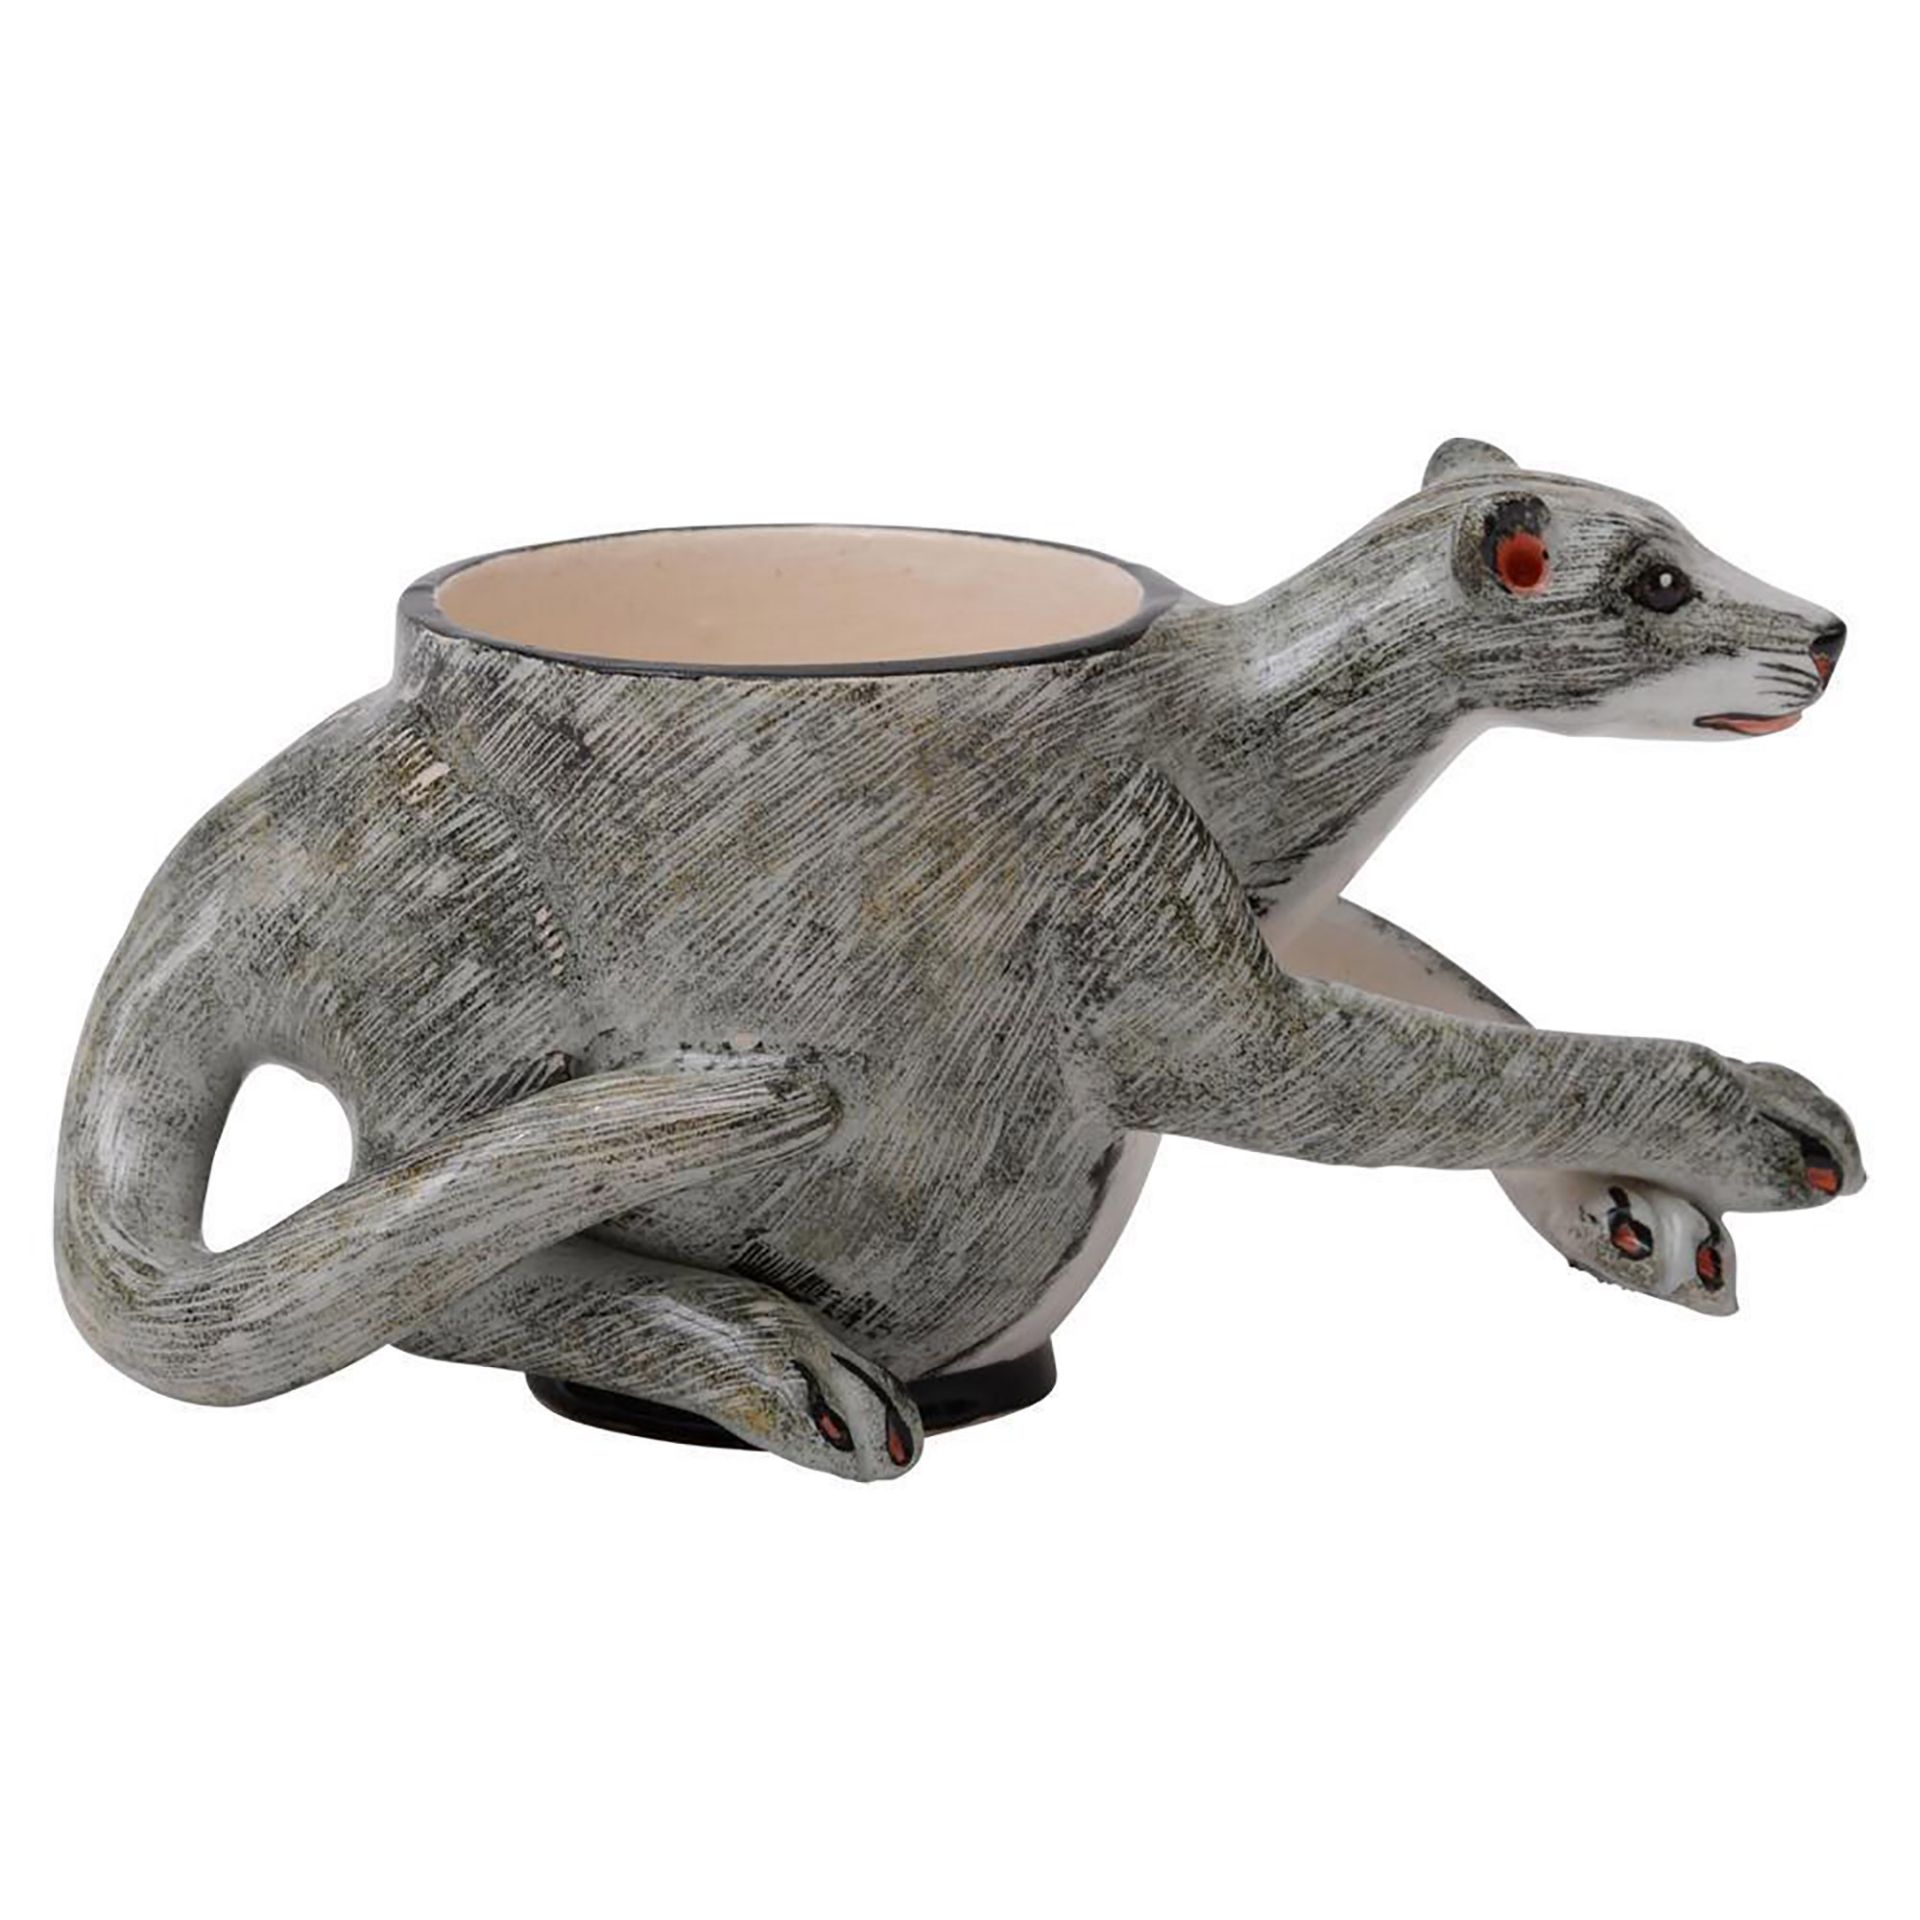 Mongoose Egg Cup by Ardmore Ceramics - Image 4 of 4